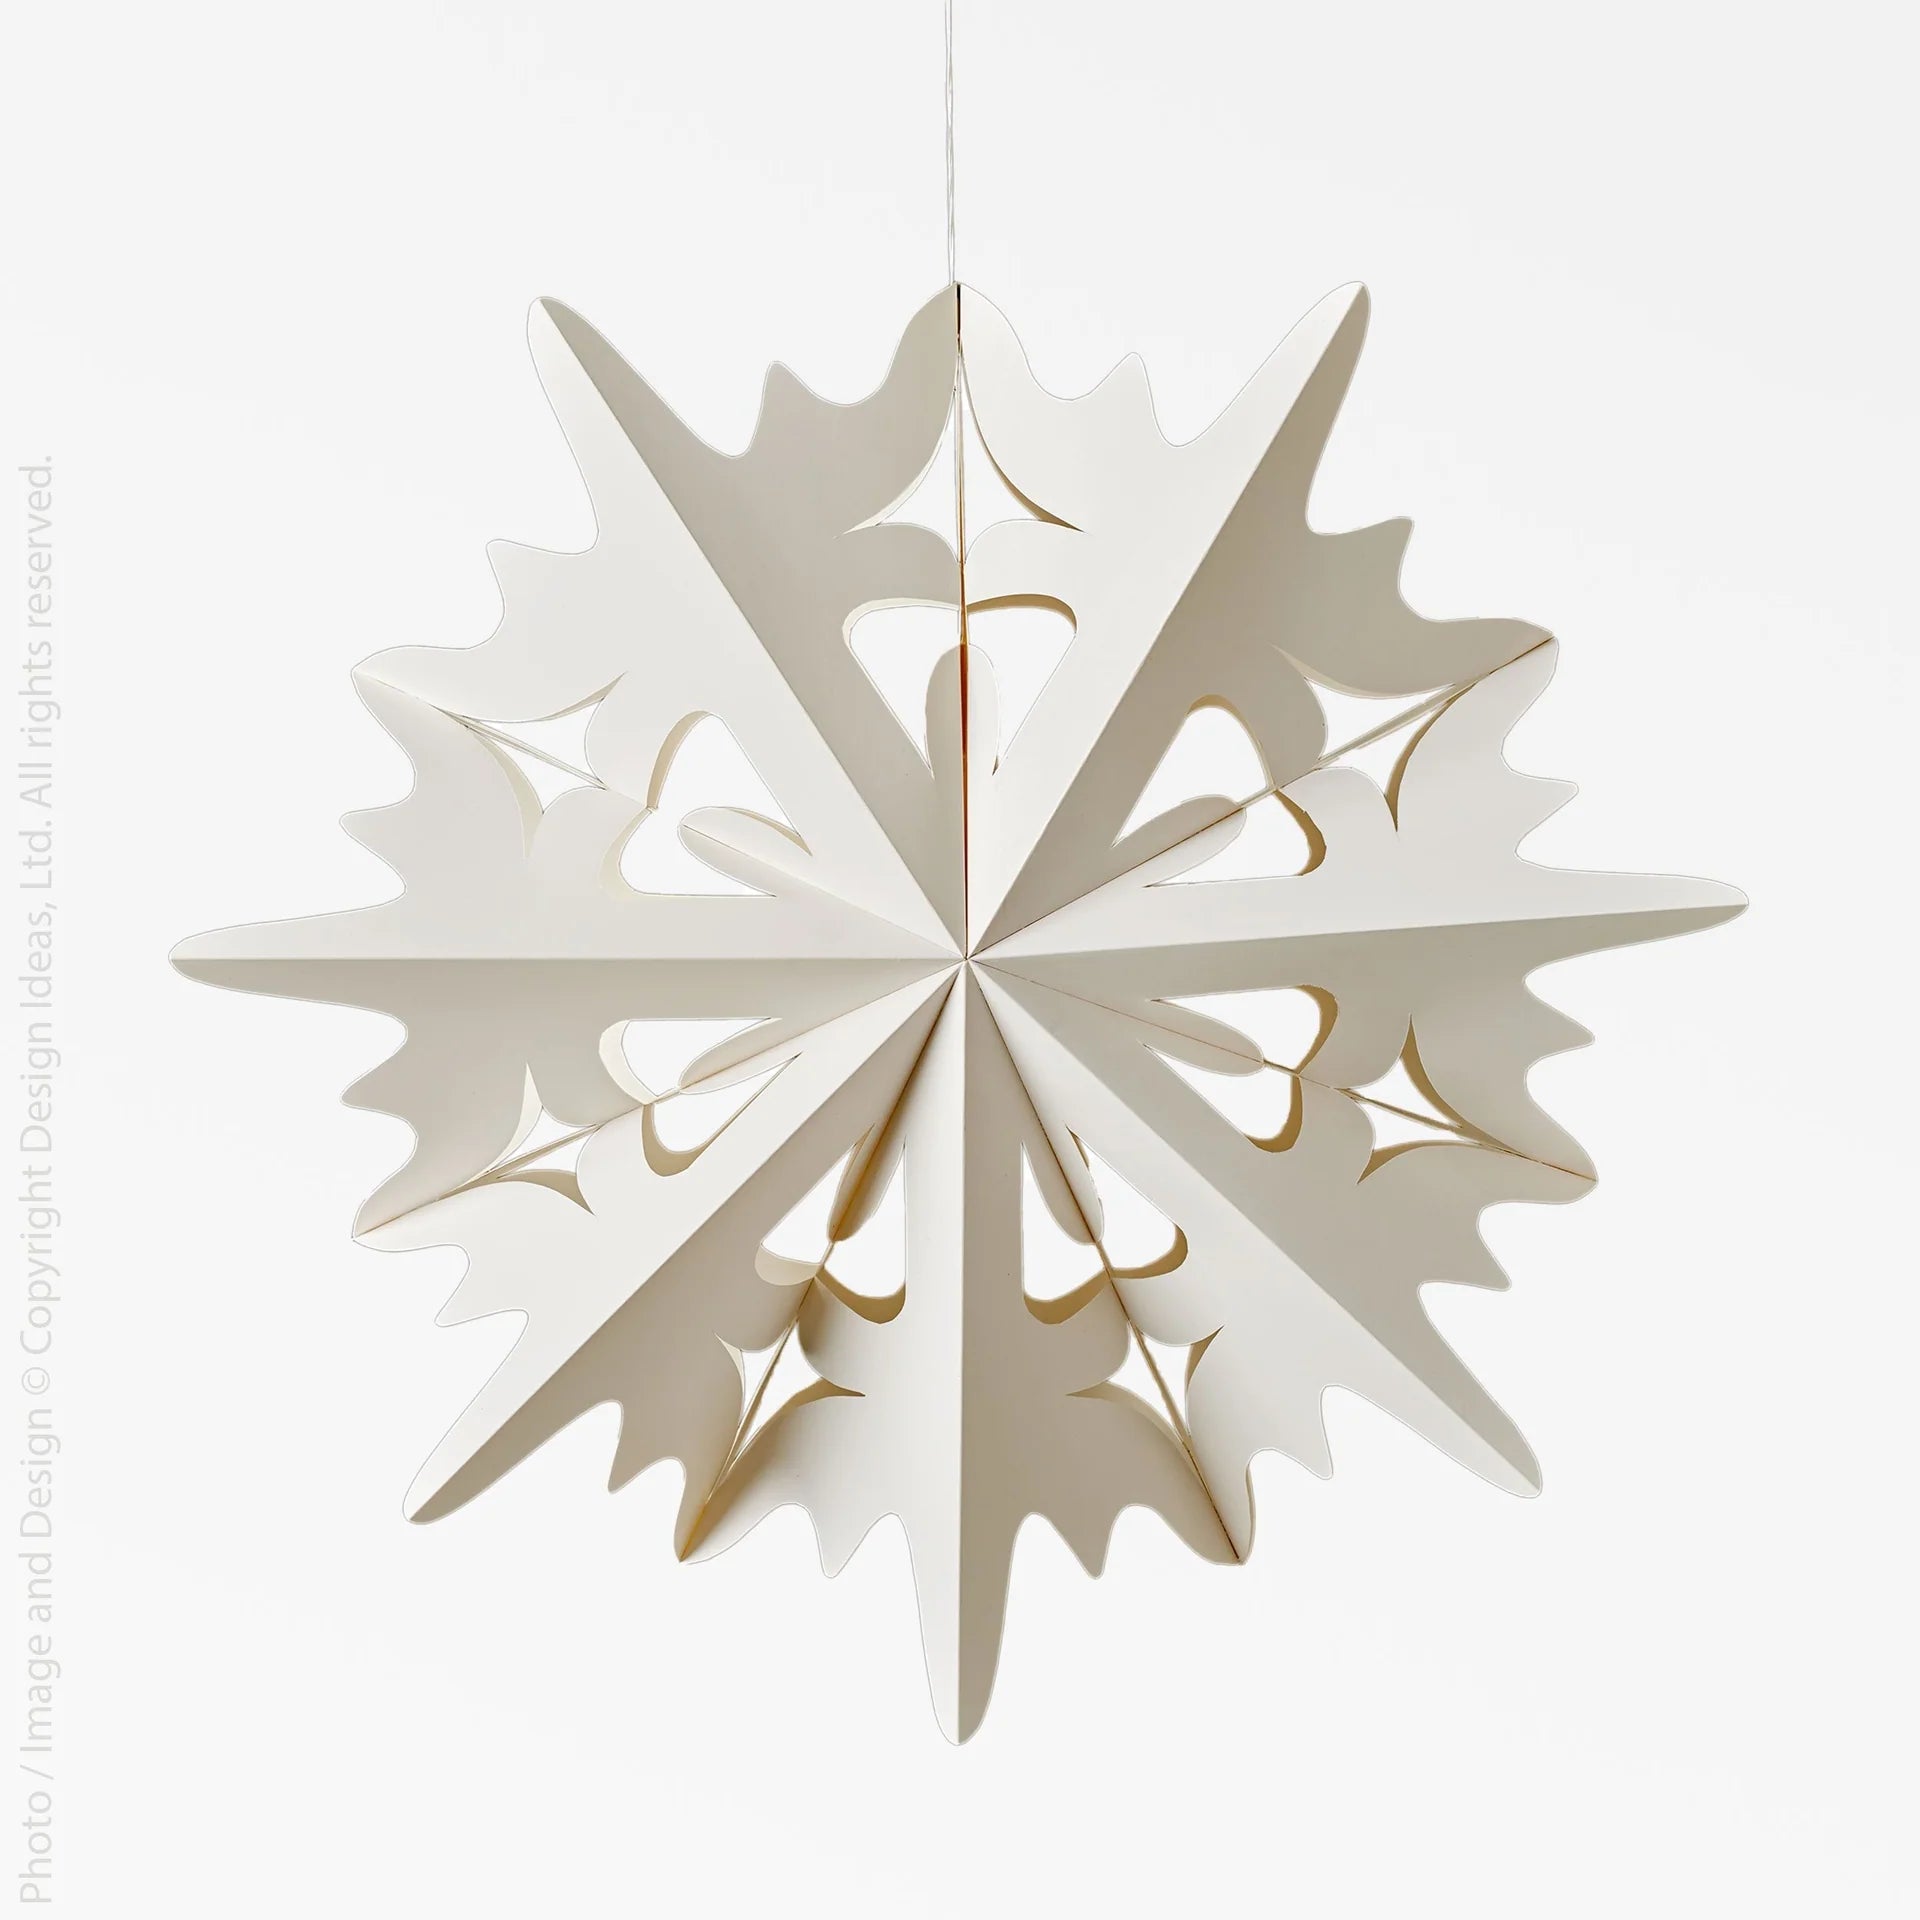 Flurry Paper Snowflakes (Large)